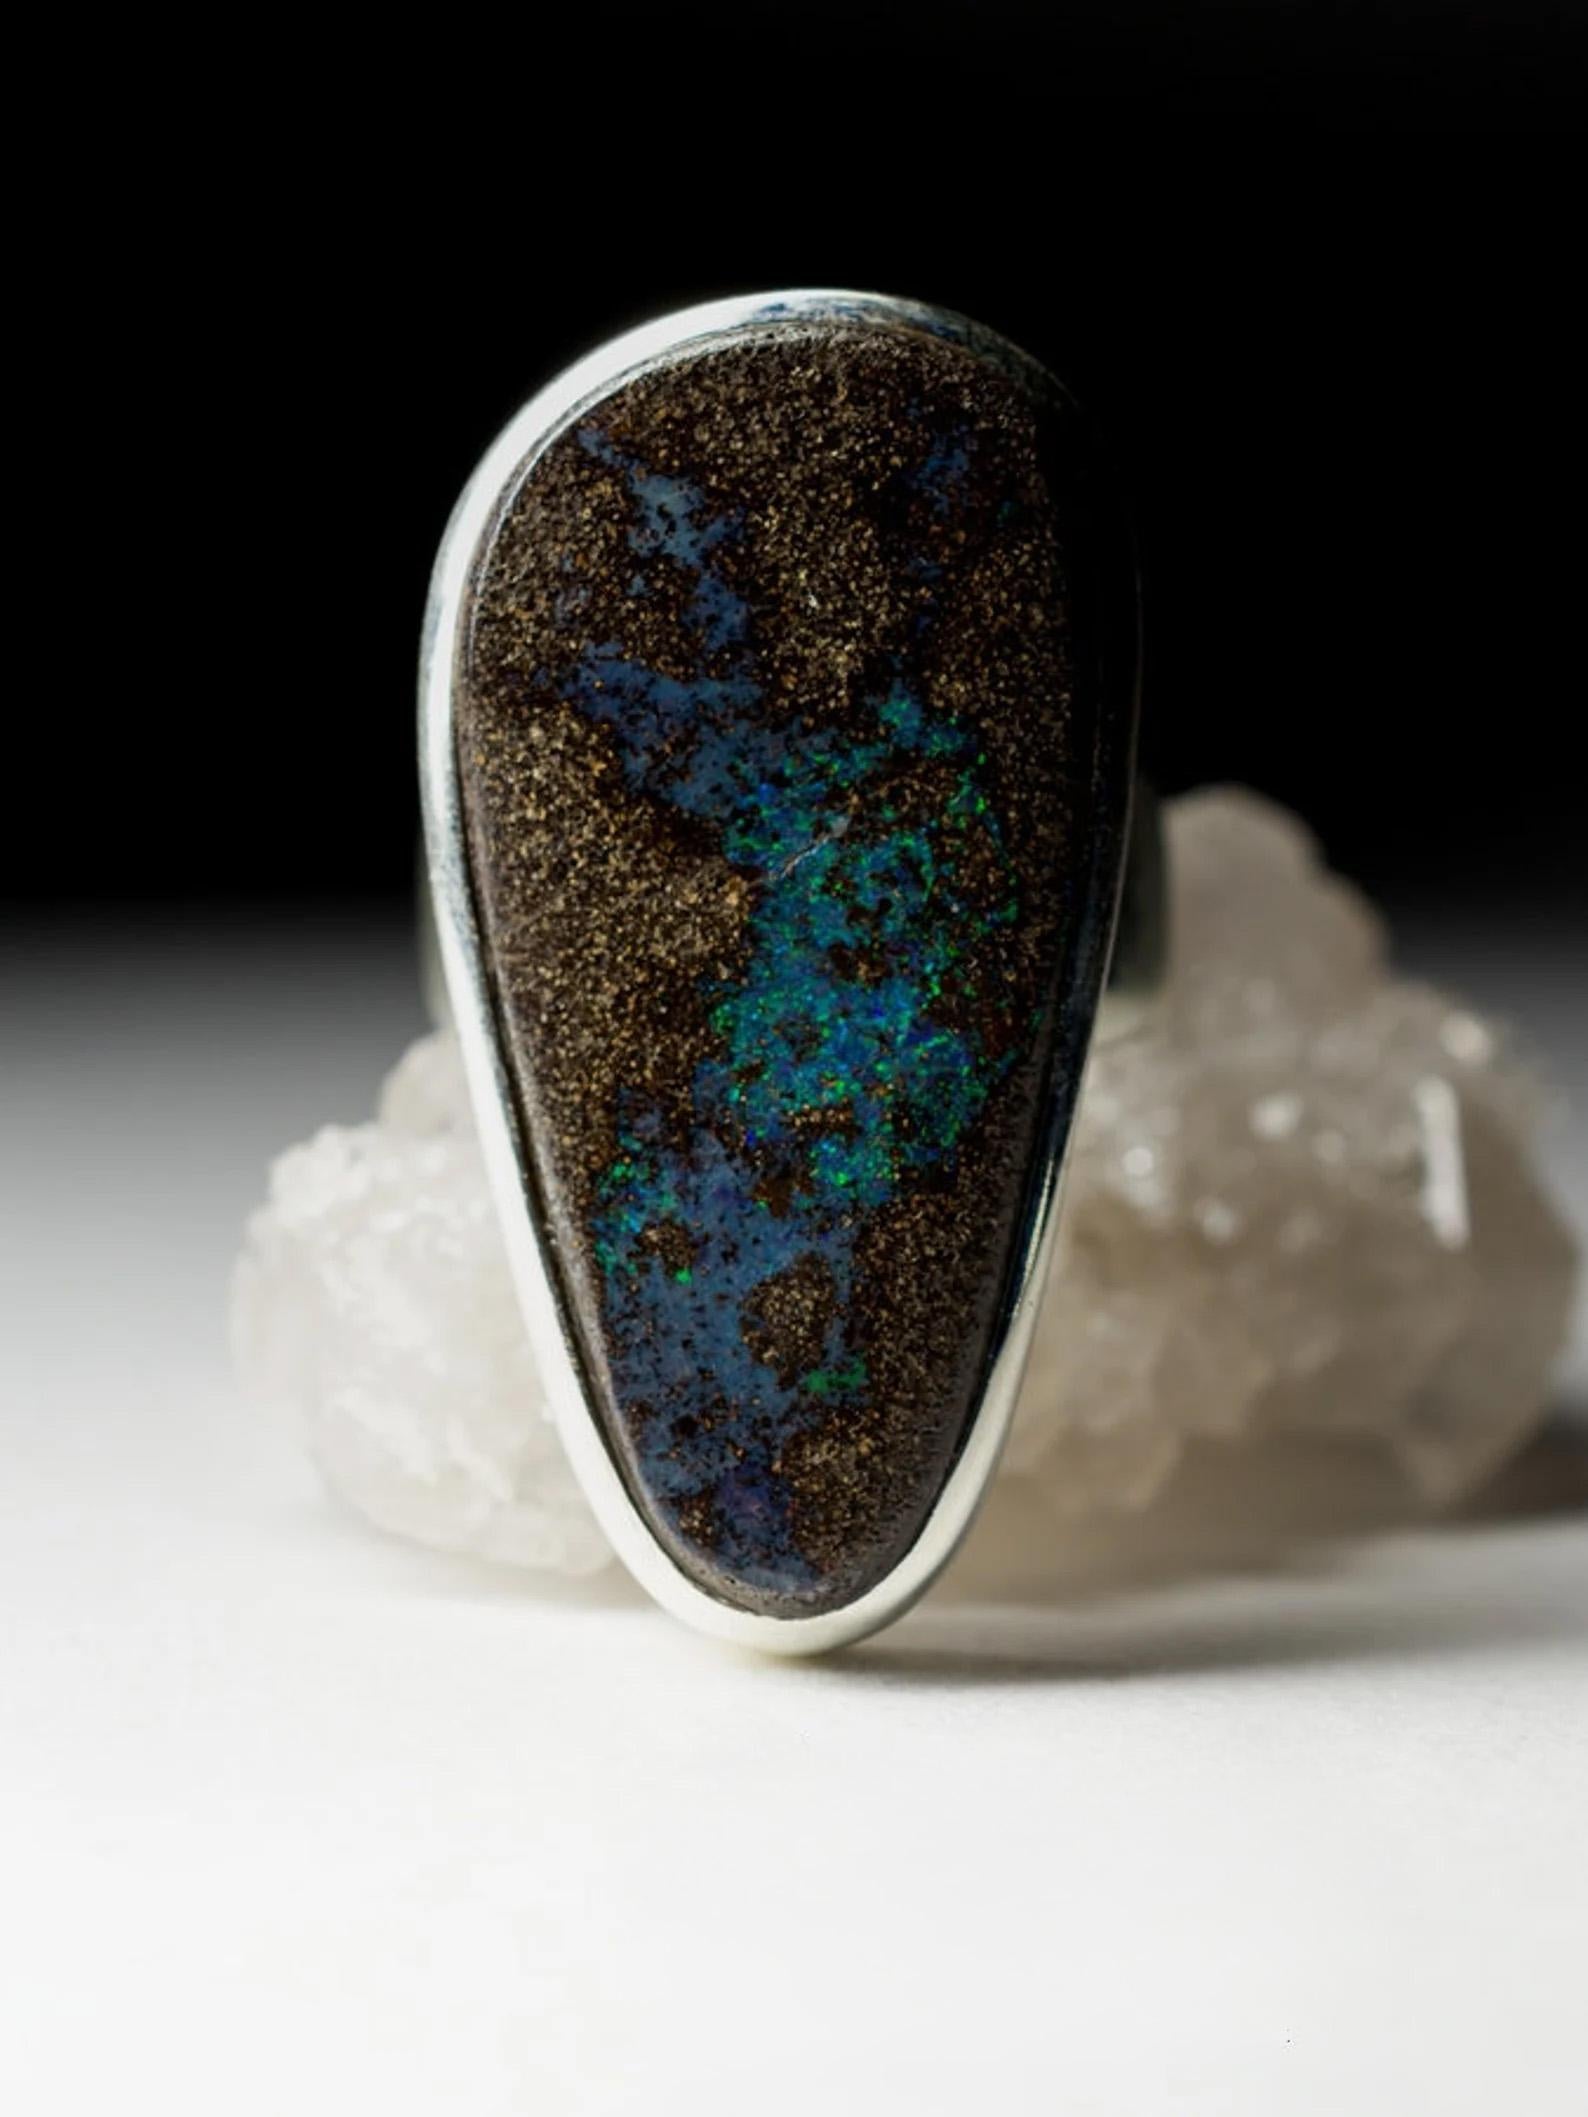 Big Boulder Opal Silver Ring Chunky Cabochon Turquoise Blue Brown Gemstone 2